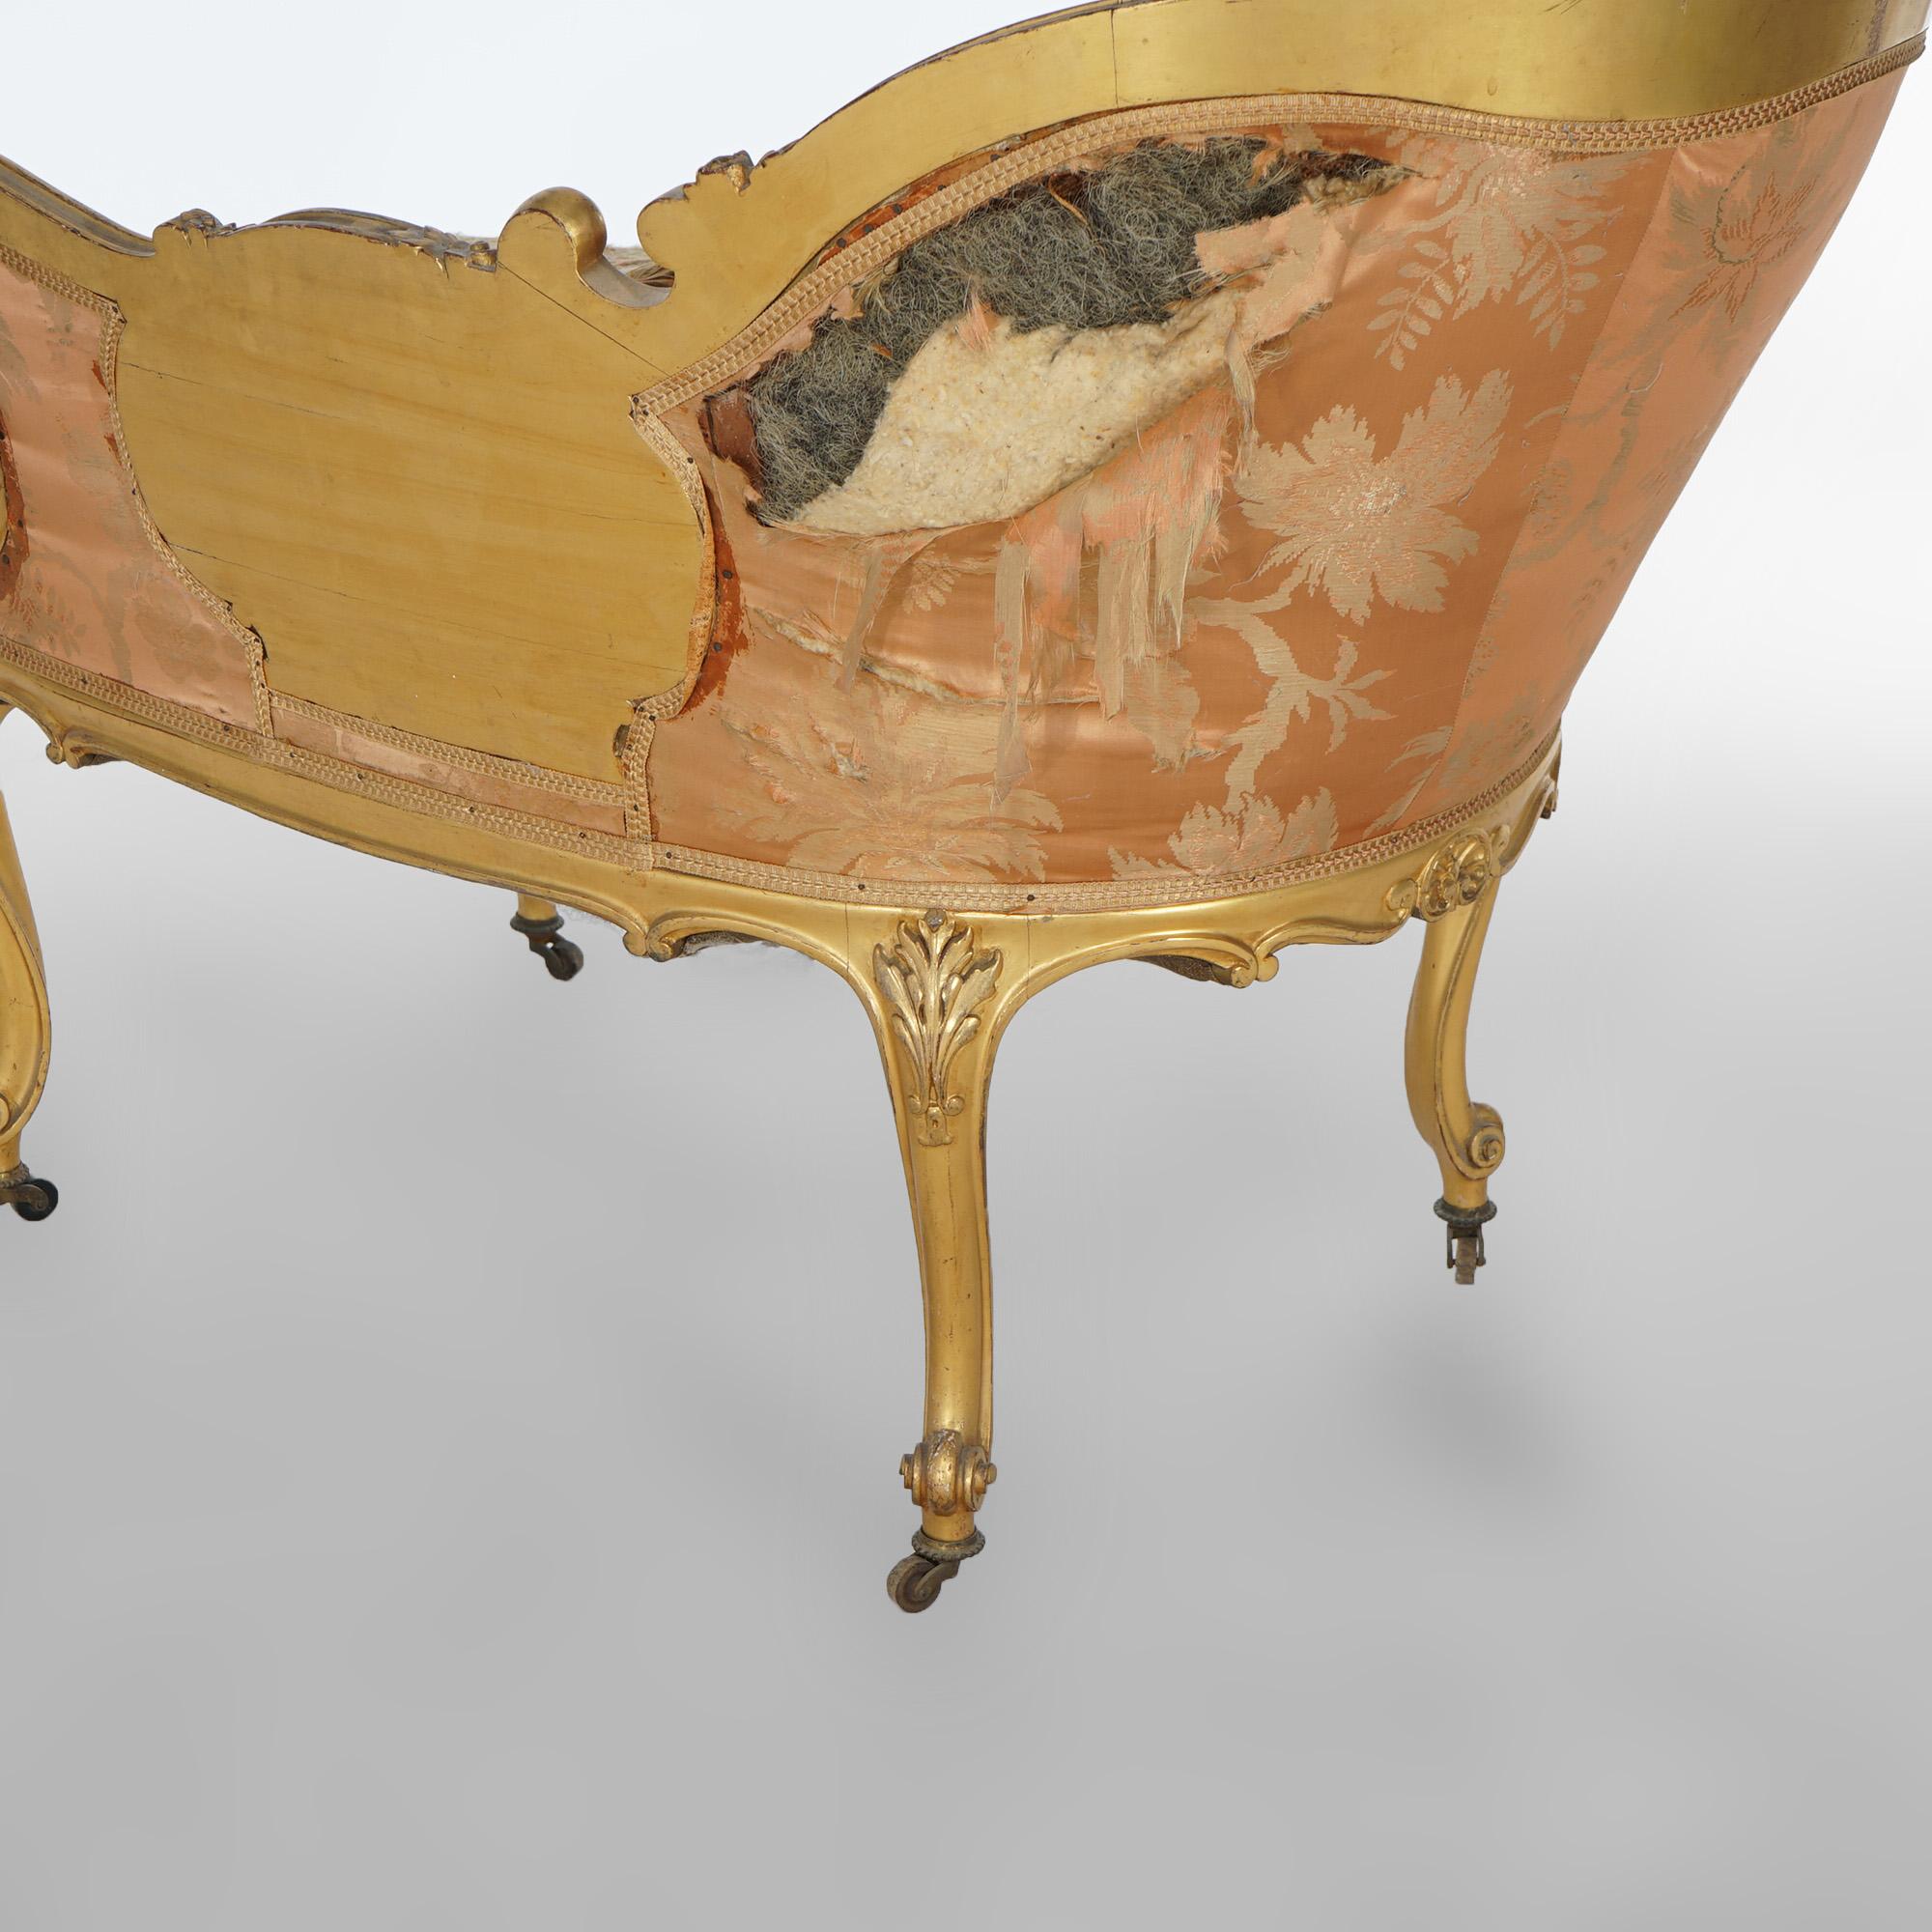 Early Antique French Rococo Vernis Martin & Giltwood Half-Recamier Settee 19th C For Sale 5